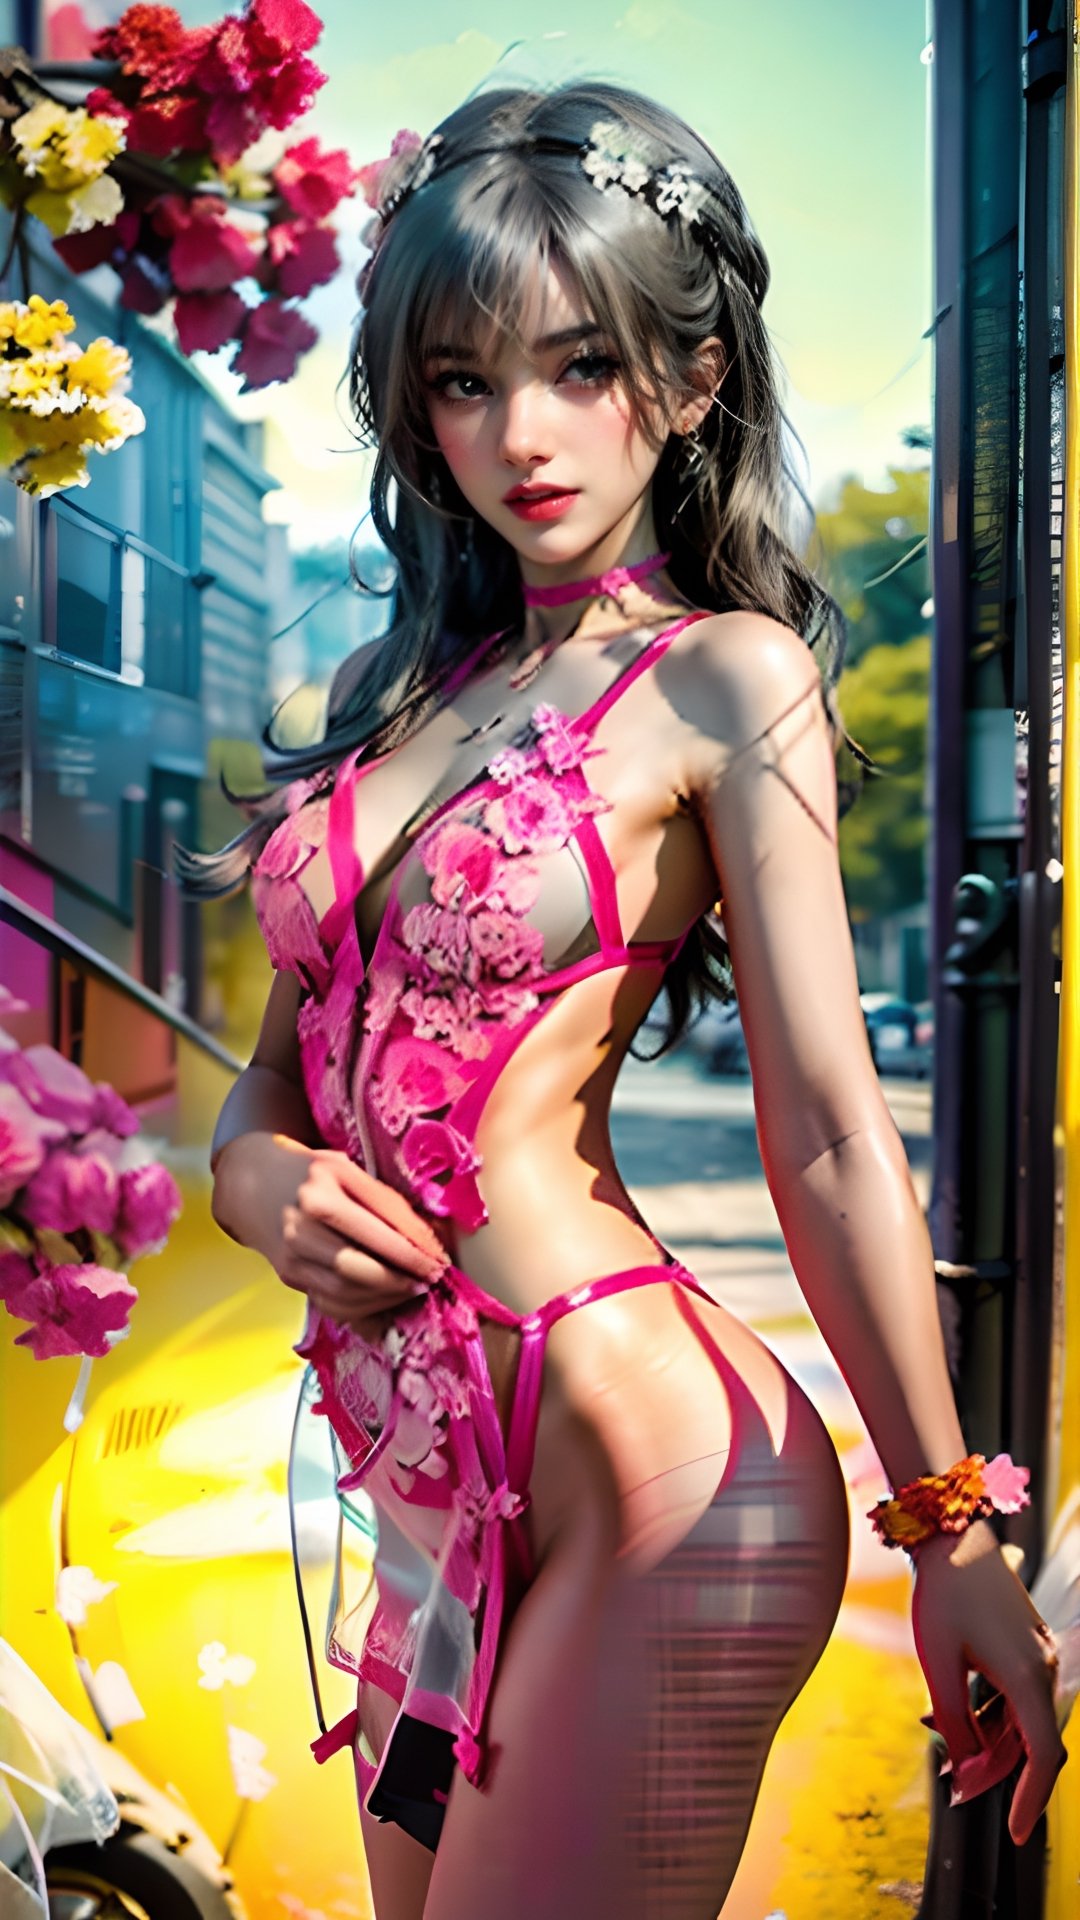 dress opening revealing hentai lingerie sex front view , Autumn style, pink and yellow flowers blooming, depth of field, Pink flowers and lighting bokeh as background, pink and white Boss dress , 1girl, (chinese naughty beauty:1) snow-white delicate skin, long light brown curly hair, and a silver hairpin on her head. The eyes are a deep brown color big and charming, wearing pink and white long Boss dress, and long scaf, choker around the neck, full of mysterious stories. With pale pink lips, smiling and loughing, charming and cute. FilmGirl, xxmix_girl, detailed eyes, perfect eyes, mouth small,  3d style, light bokeh backgroud,3d style,isni,Movie Still,3d,3d render,dream_girl ,blurry_light_background,,girl,see-through,